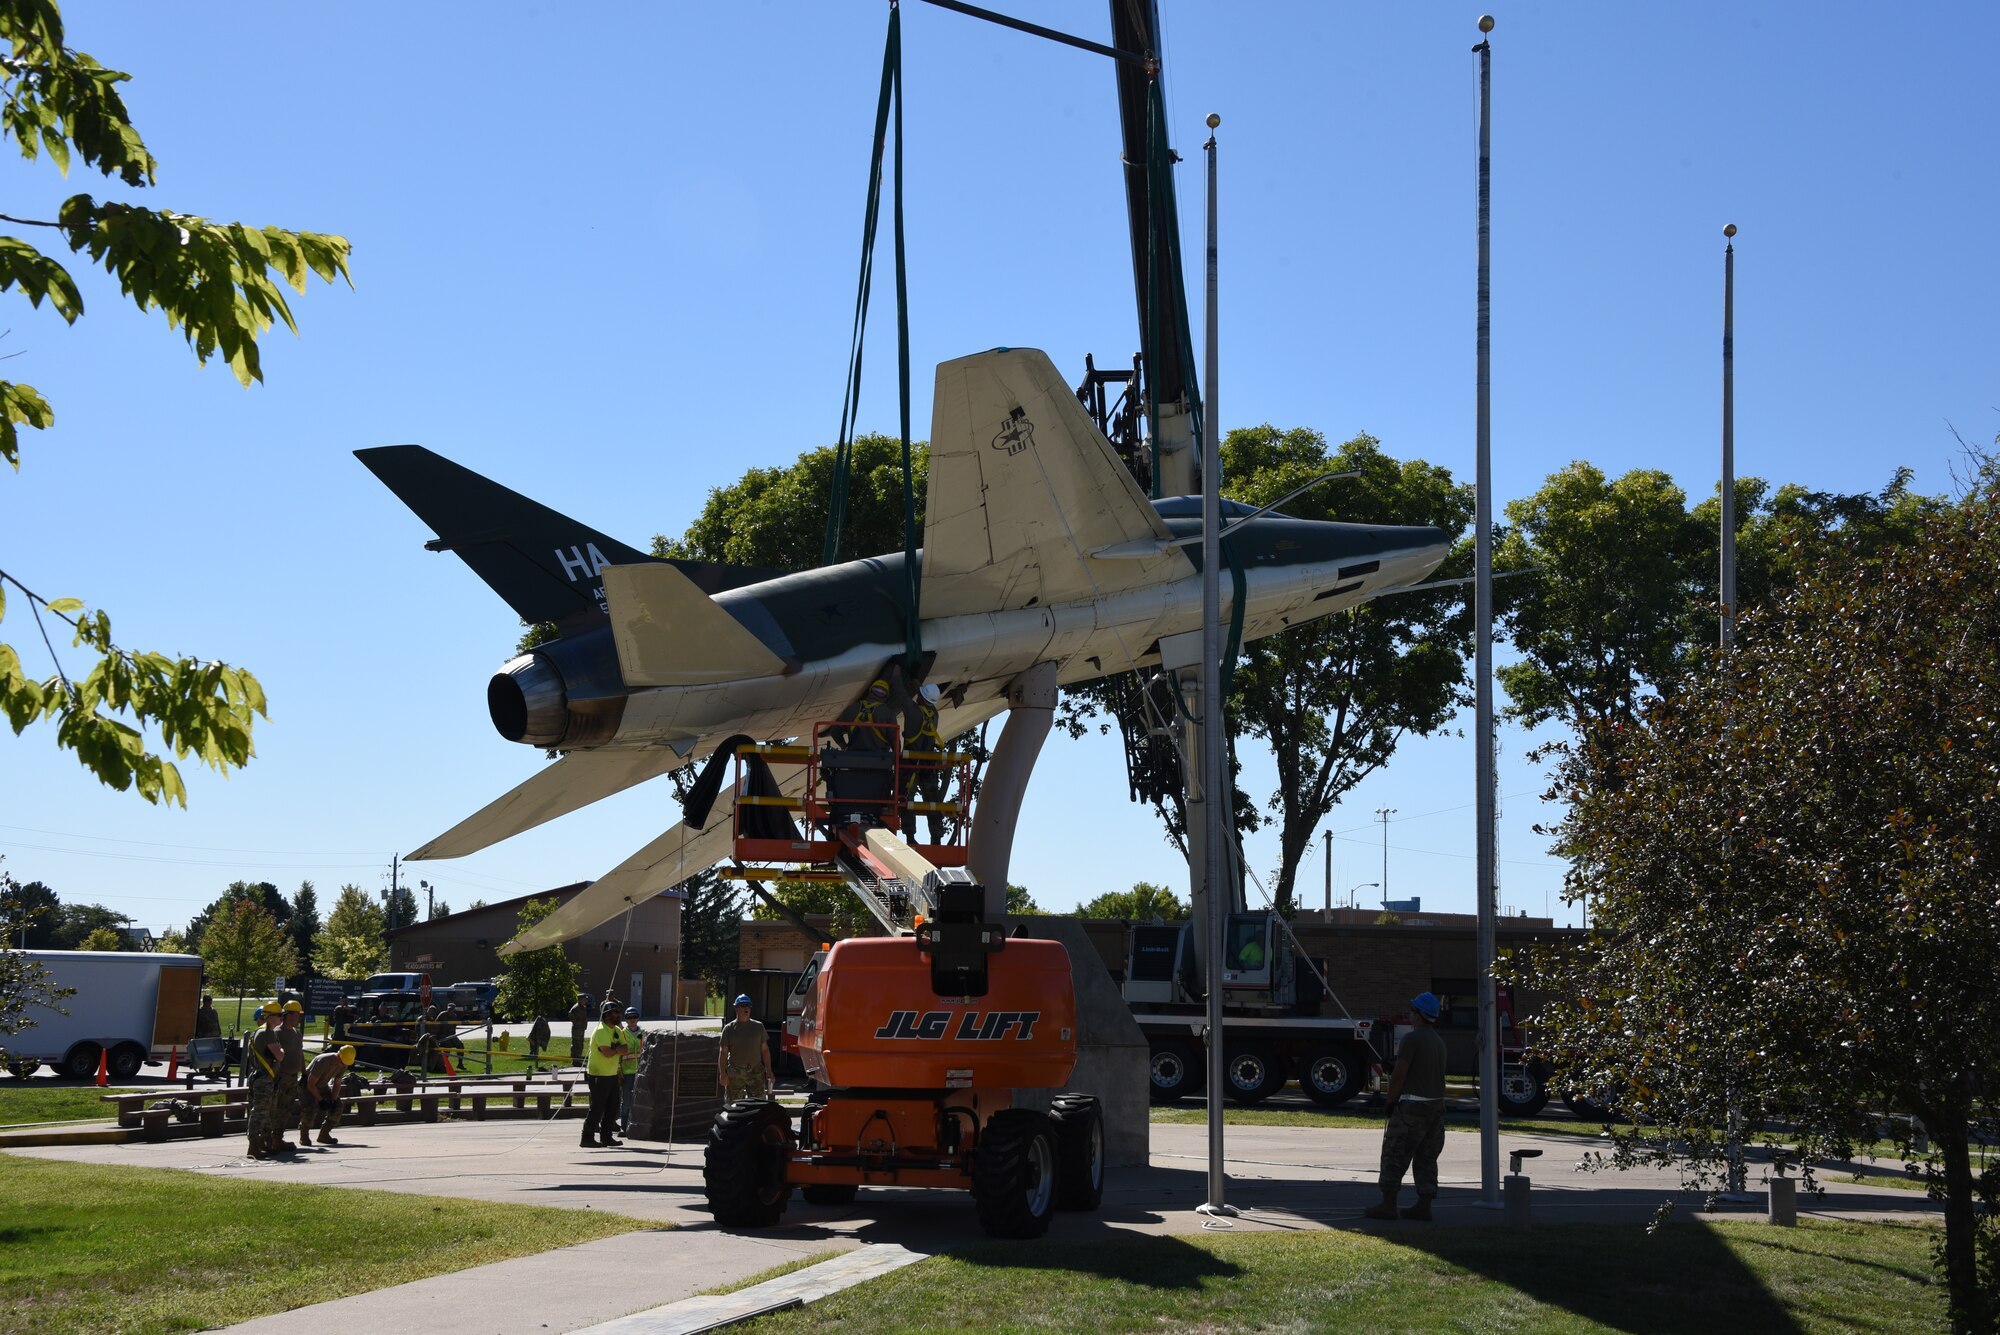 F-100 is removed from static display